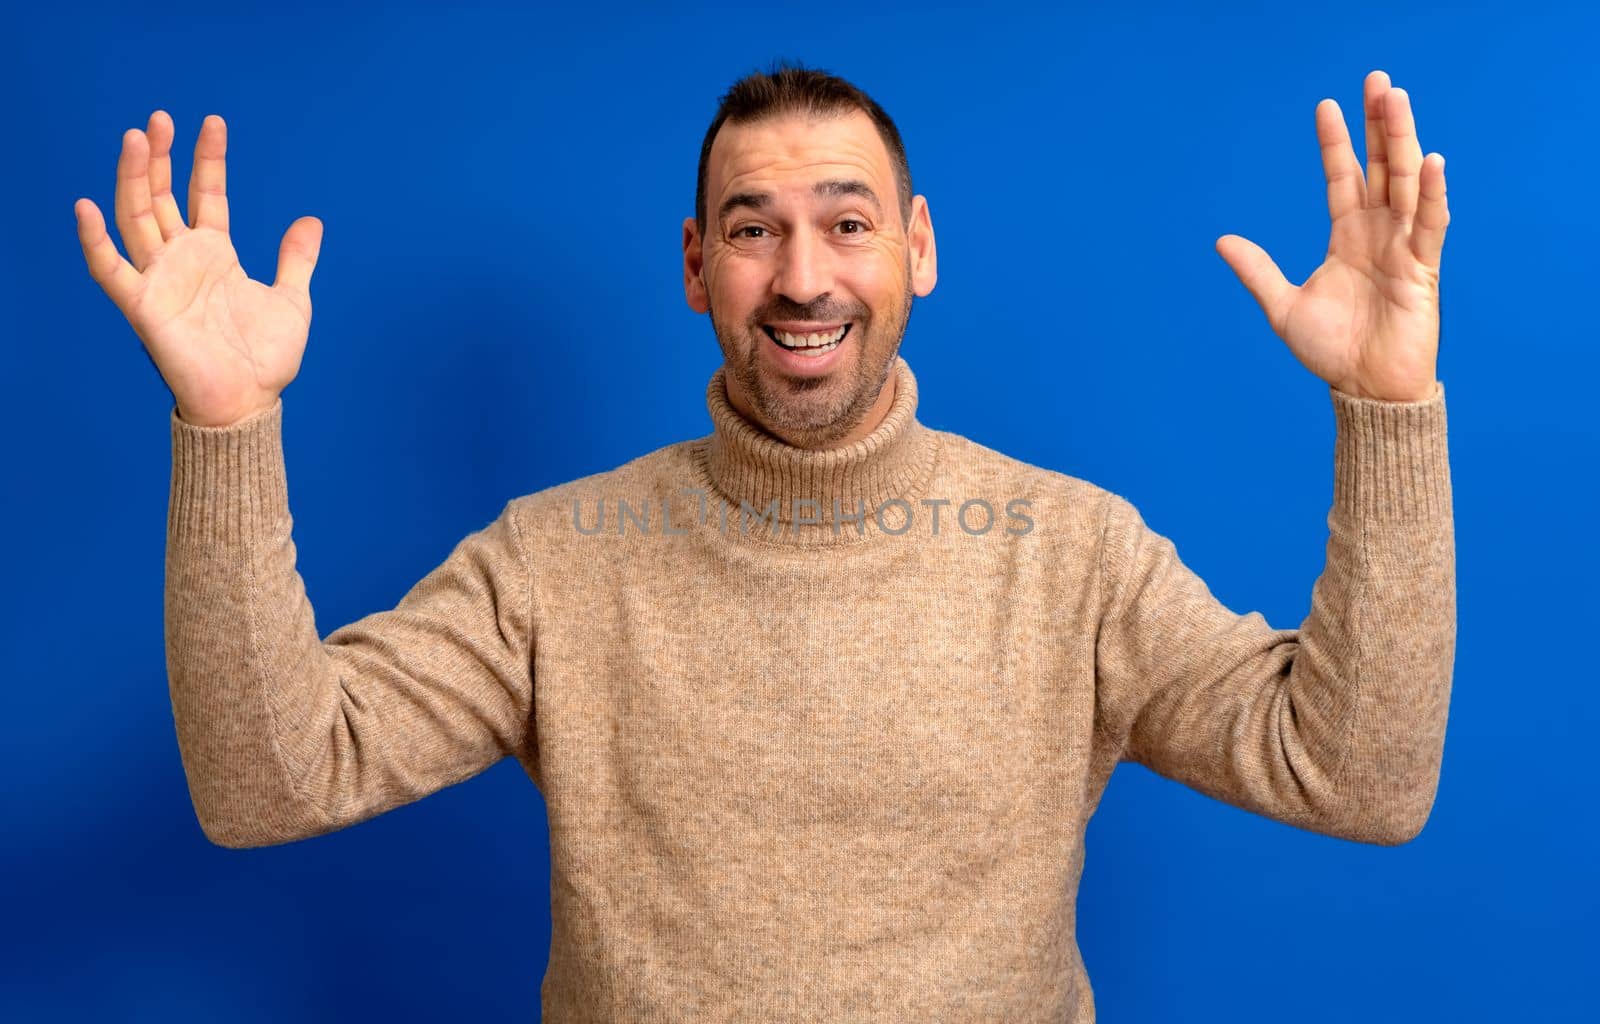 Smiling happy man in his 40s in a turtleneck holds his arms up in an expression of joy on a blue background studio portrait. People lifestyle concept